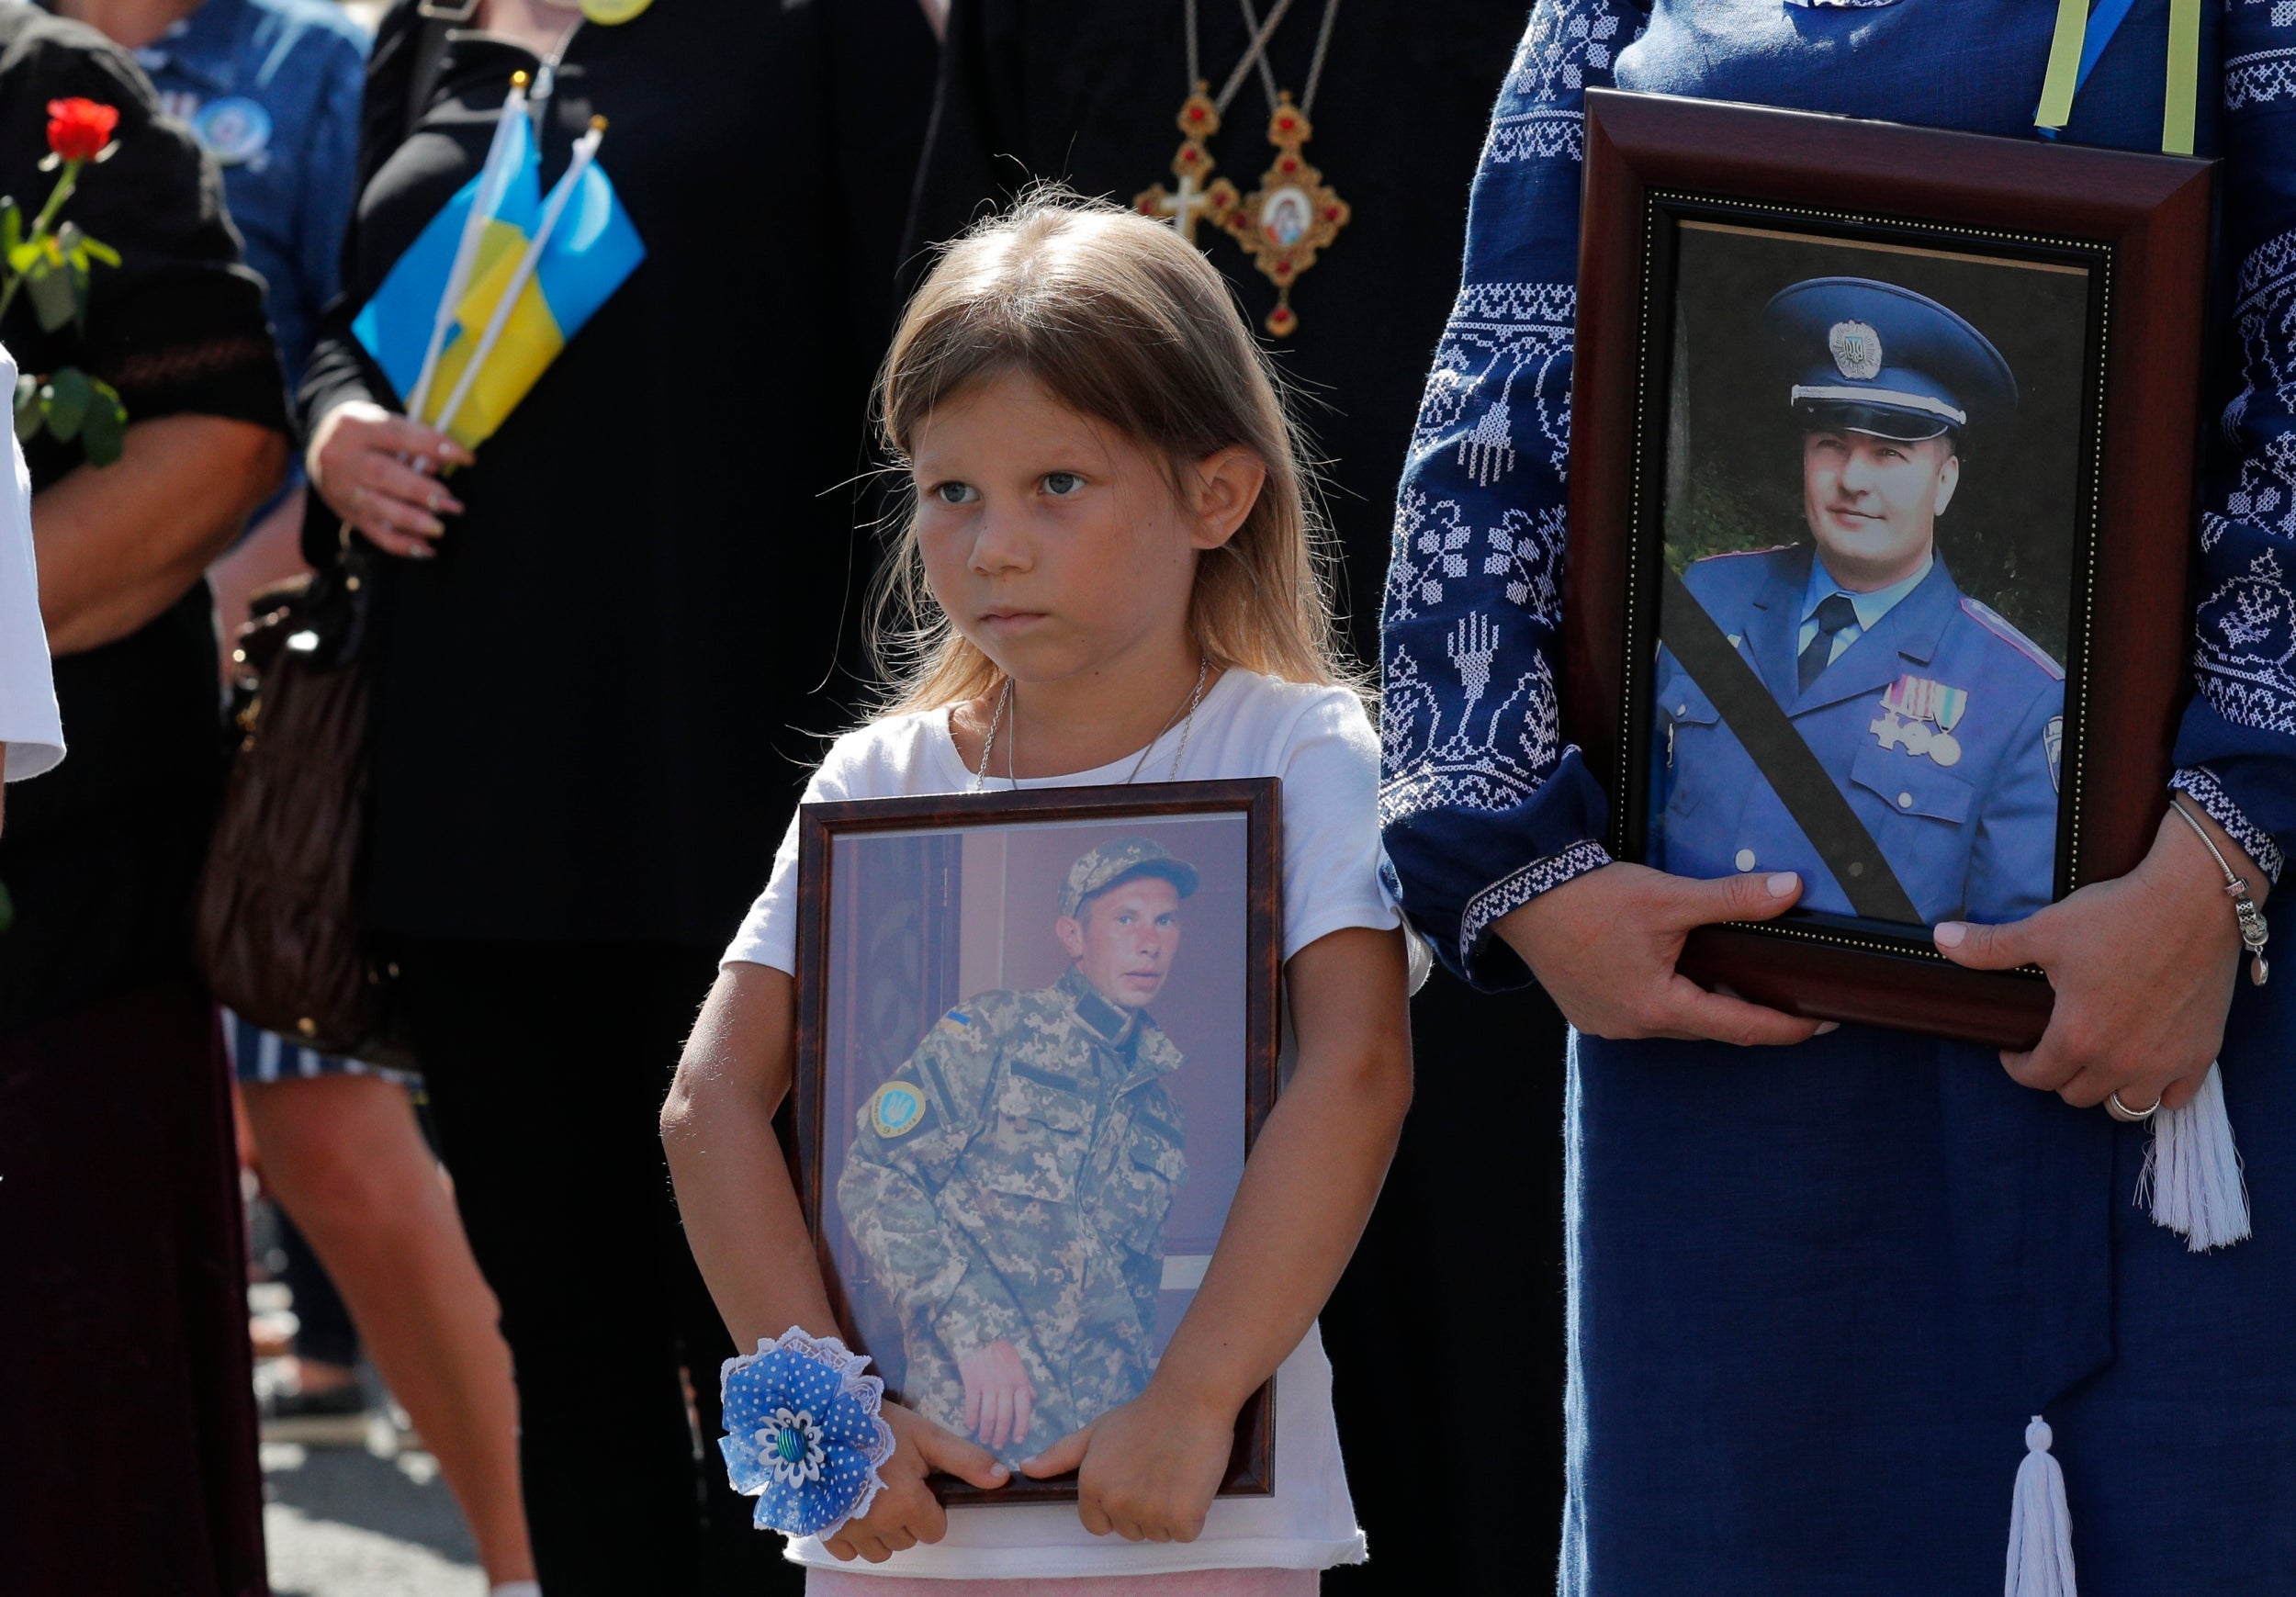 Relatives carry pictures of Ukrainian soldiers killed fighting Russia-backed separatist militias in the east of the country